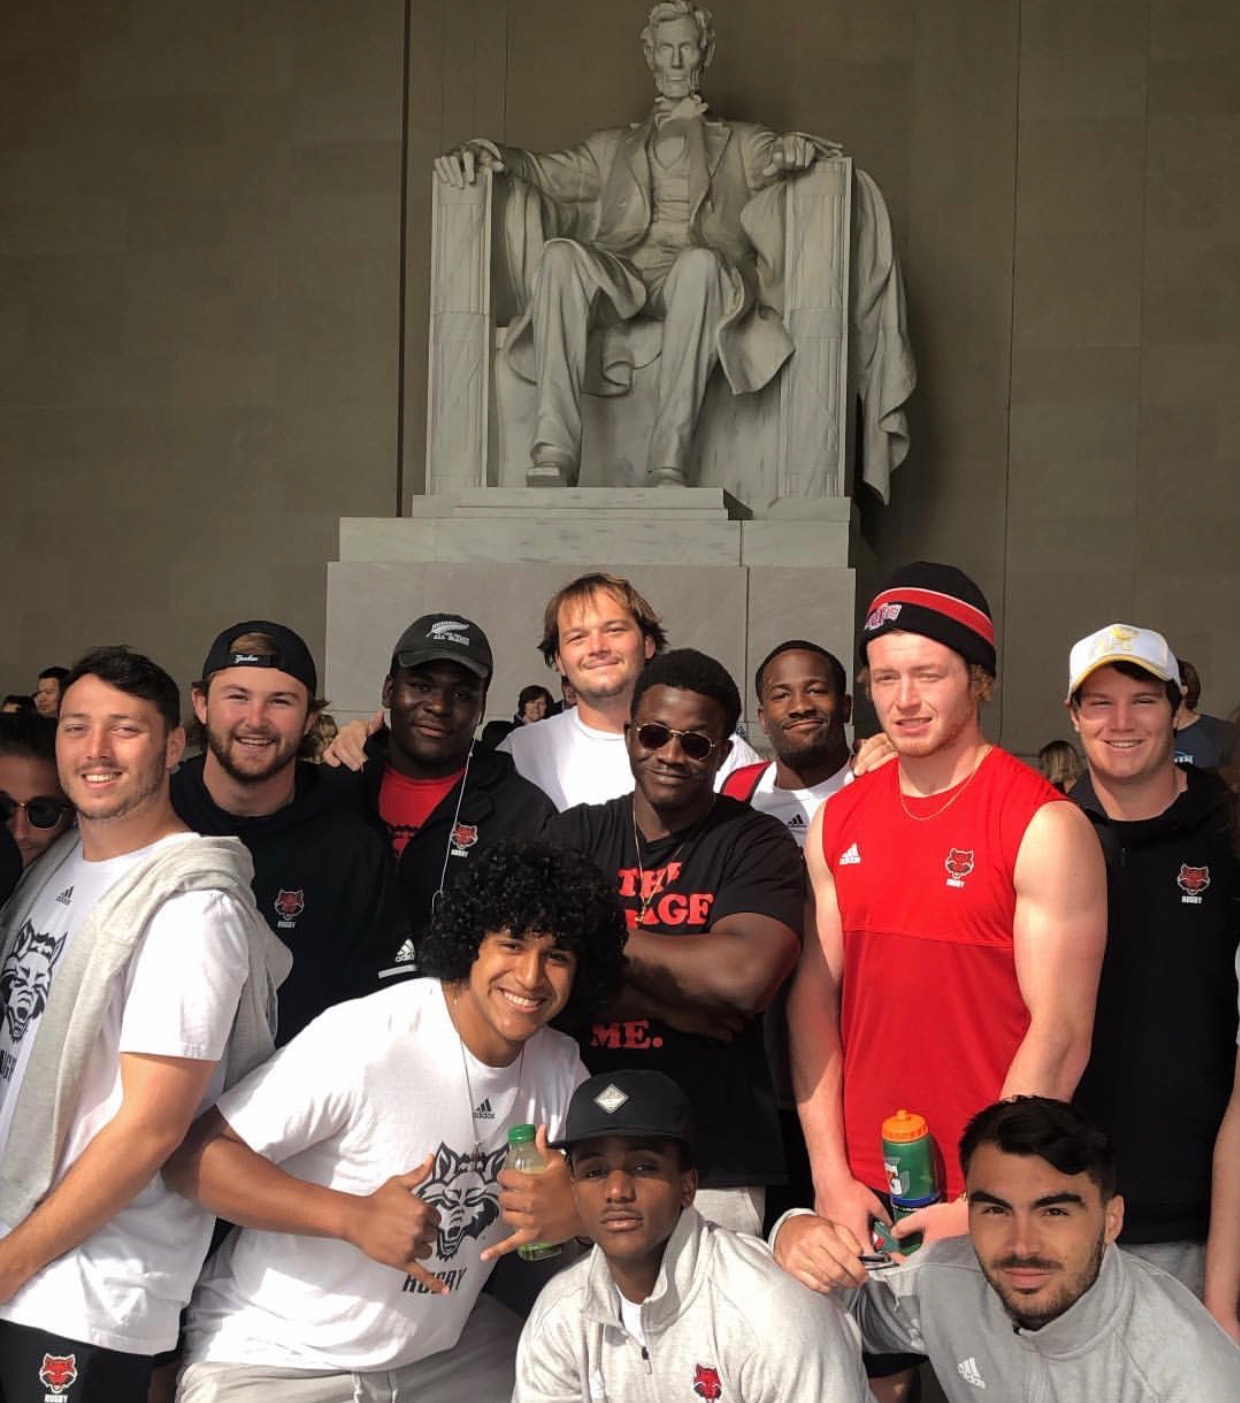 Rugby at Lincoln Memorial